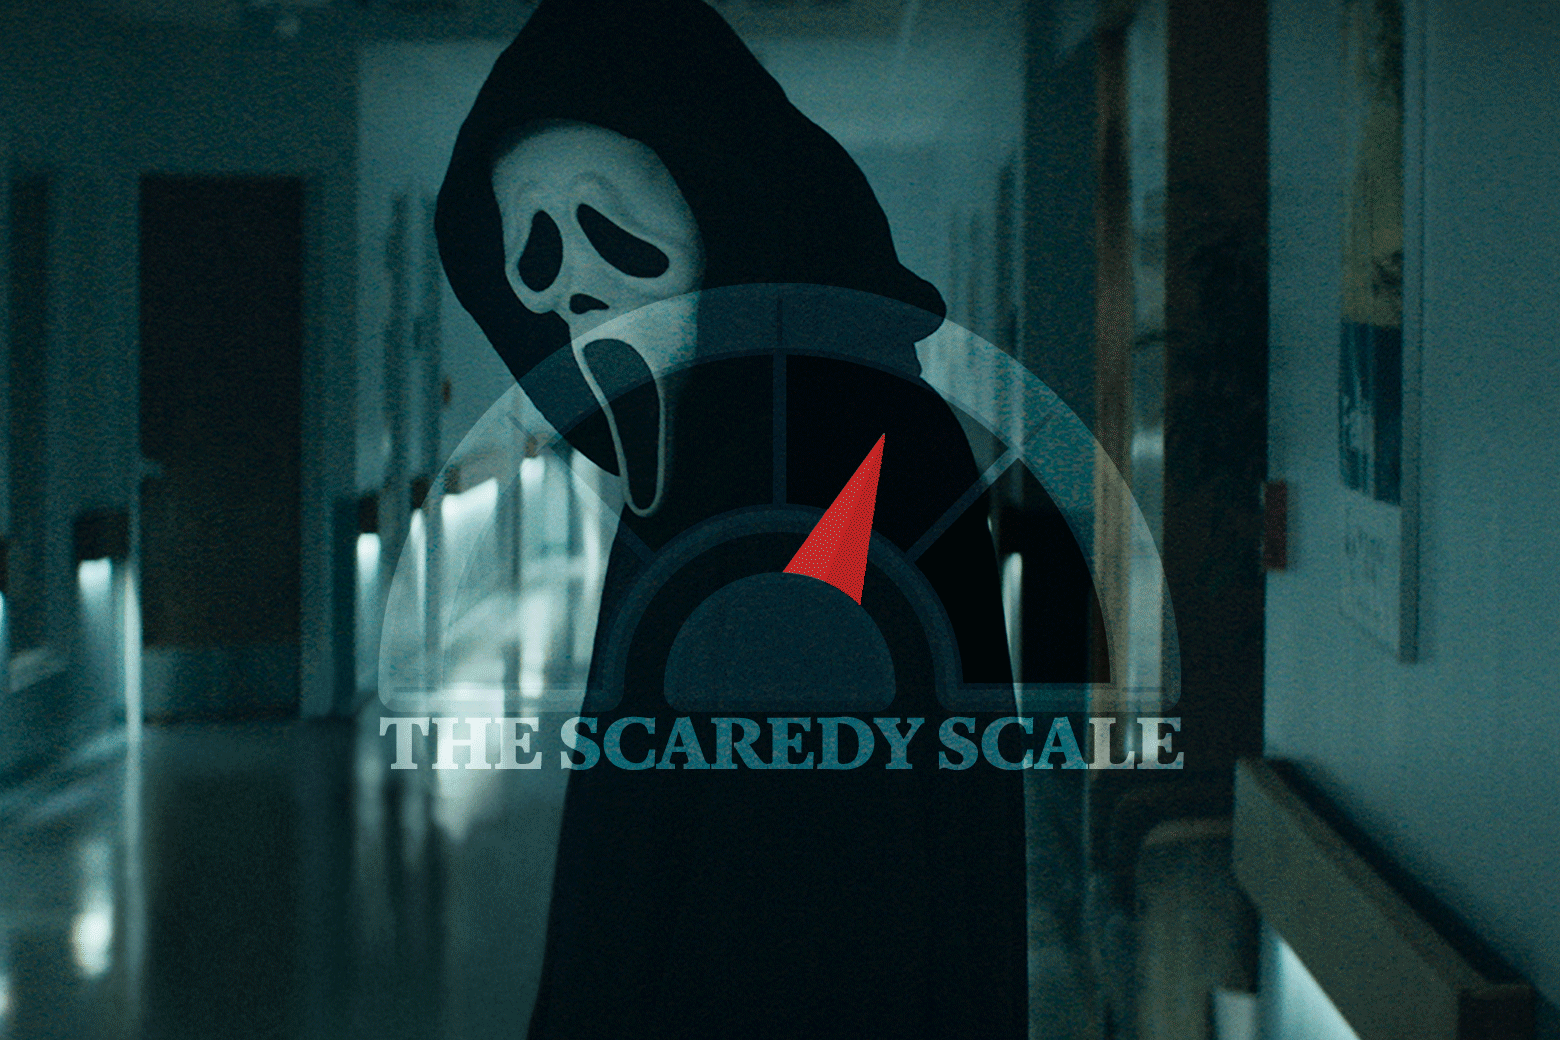 A still shows a figure standing in a long hallway, in the infamous ghostface mask and black robe. Over it, a twitching meter and the words "The Scaredy Scale"